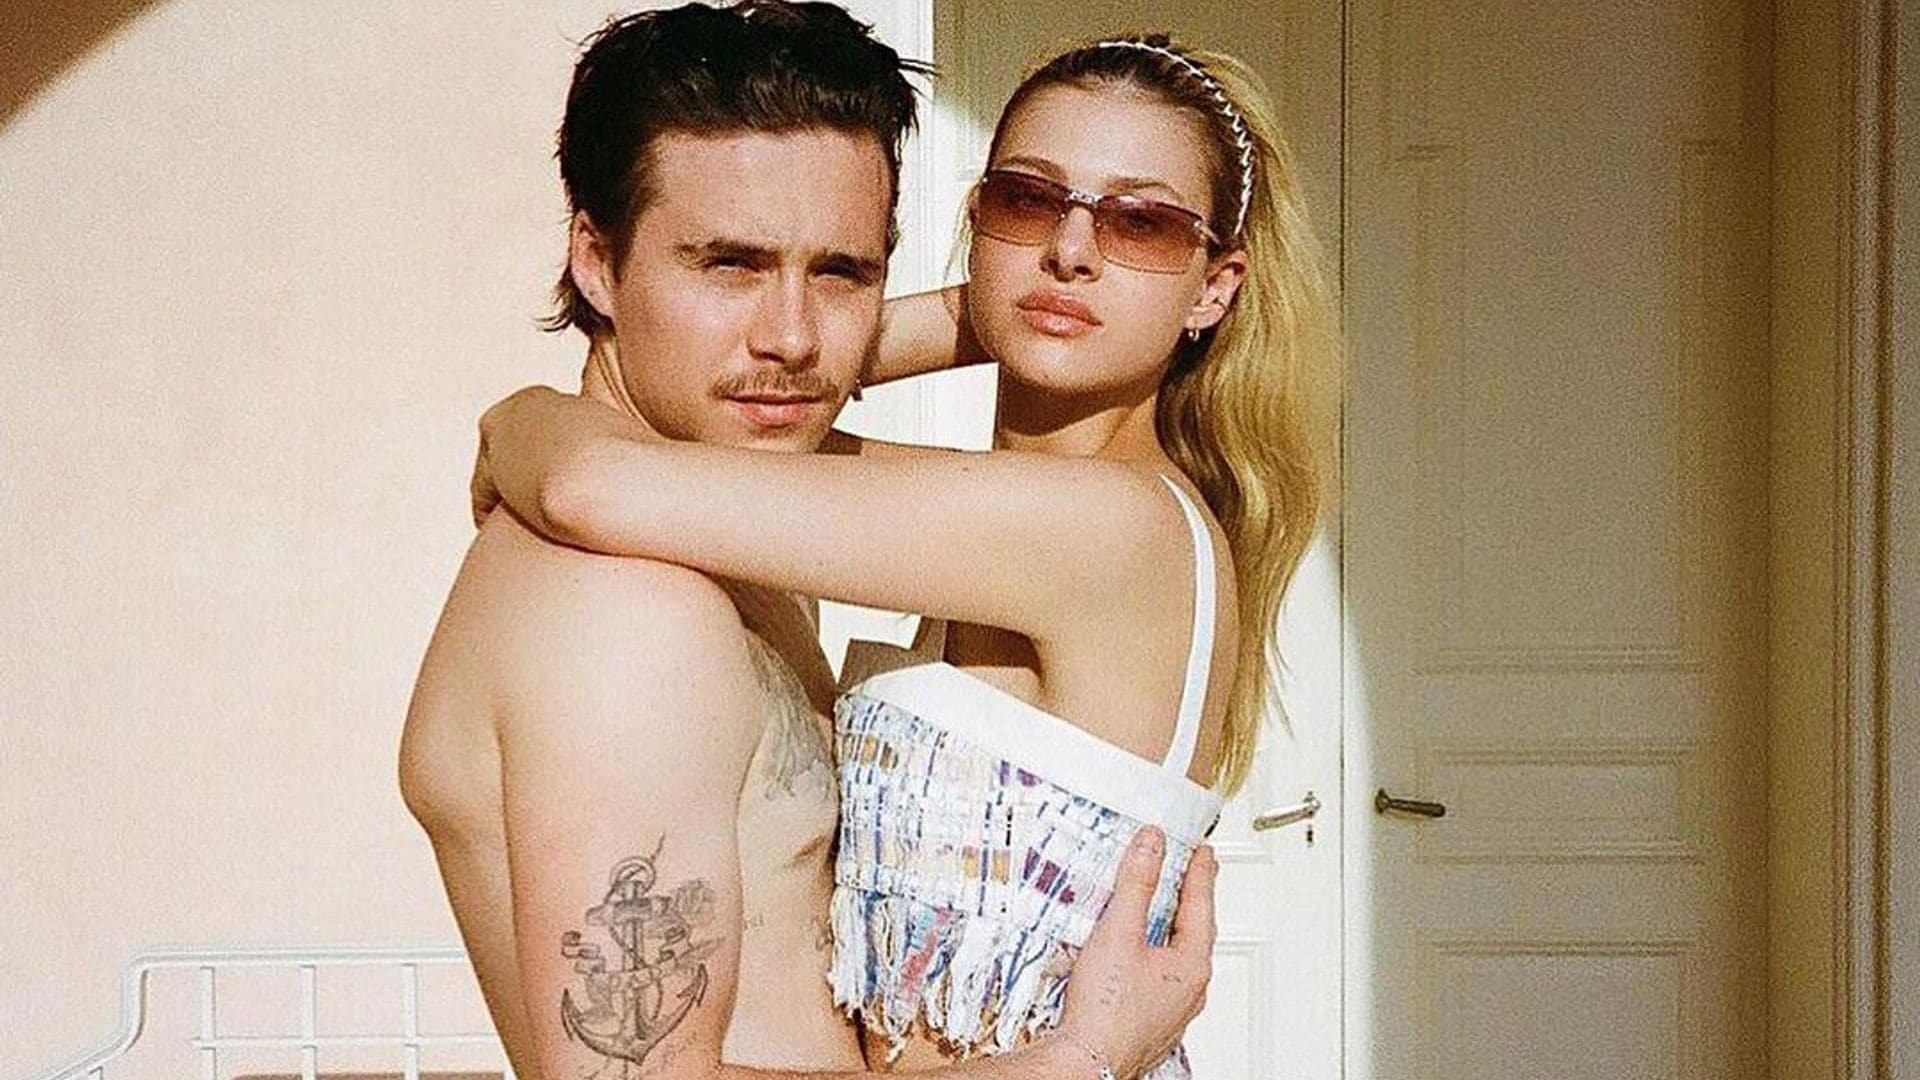 Brooklyn Beckham asks Nicola Peltz to marry him: See their engagement photo by Harper!